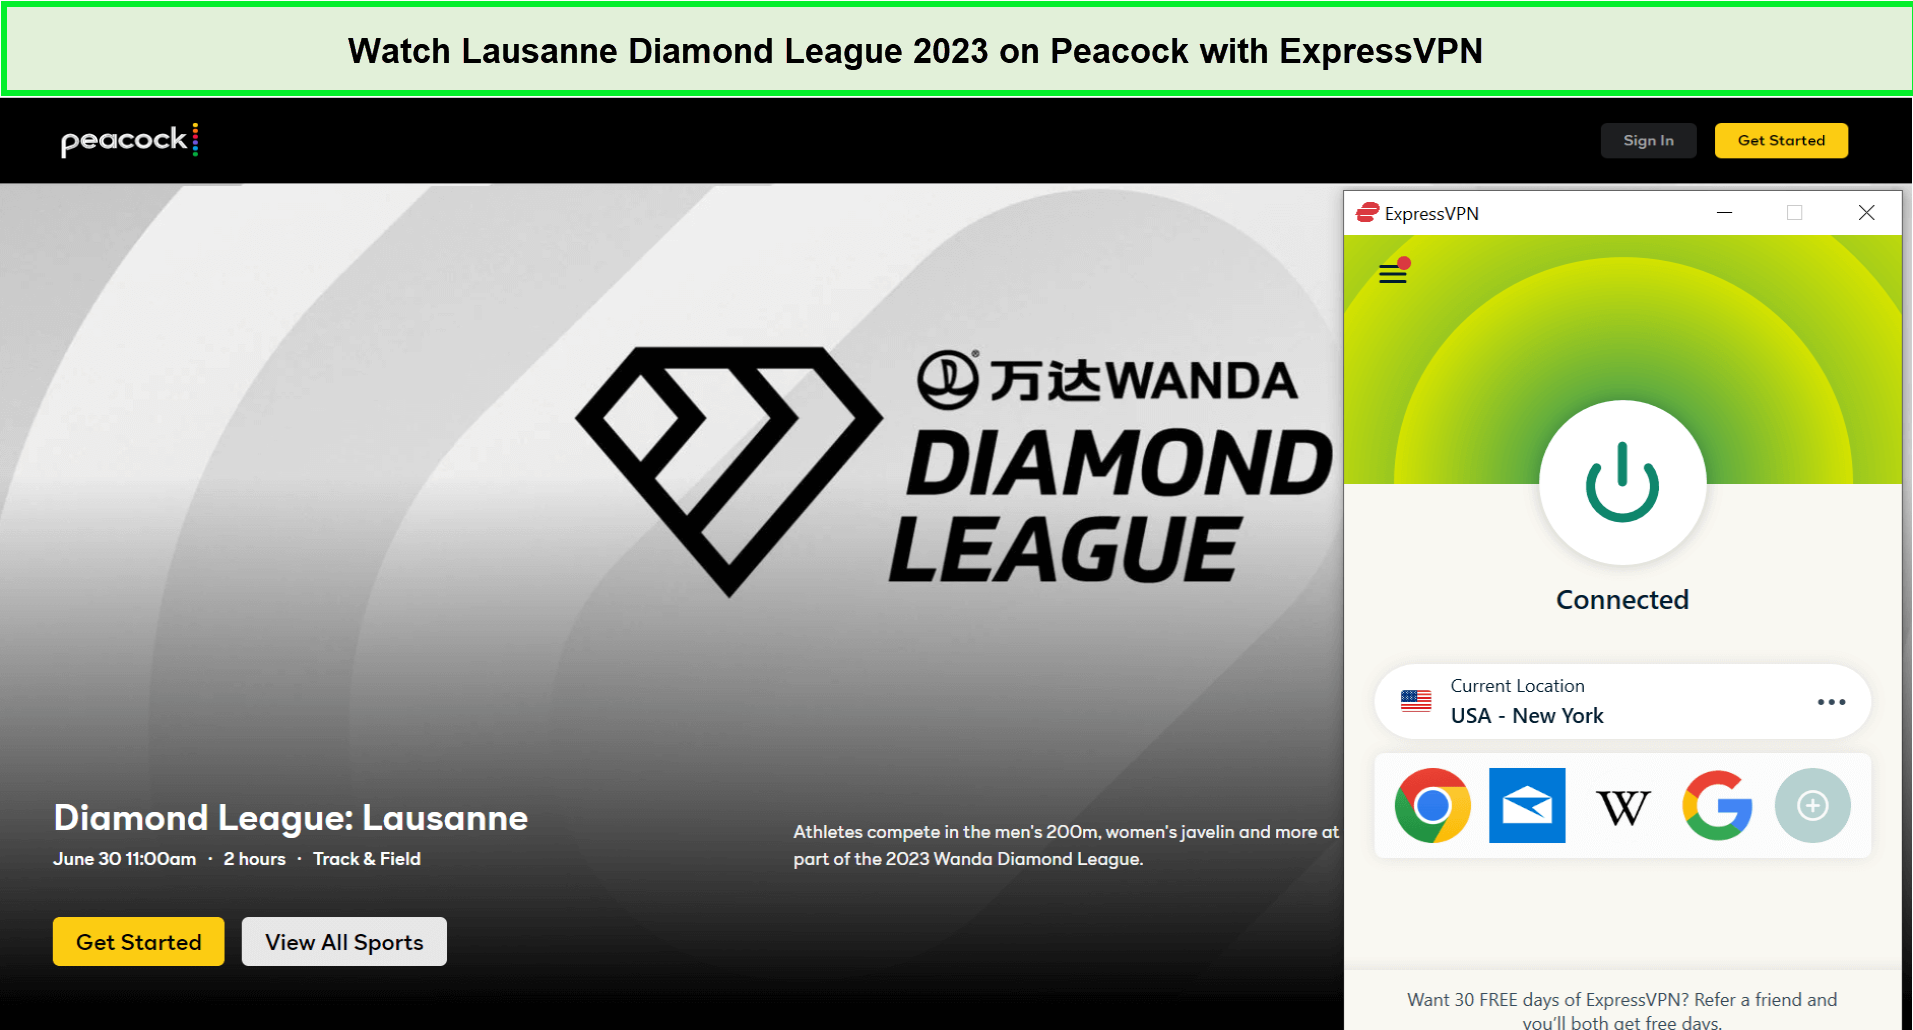 Watch-Lausanne-Diamond-League-2023-in-Japan-on-Peacock-with-ExpressVPN